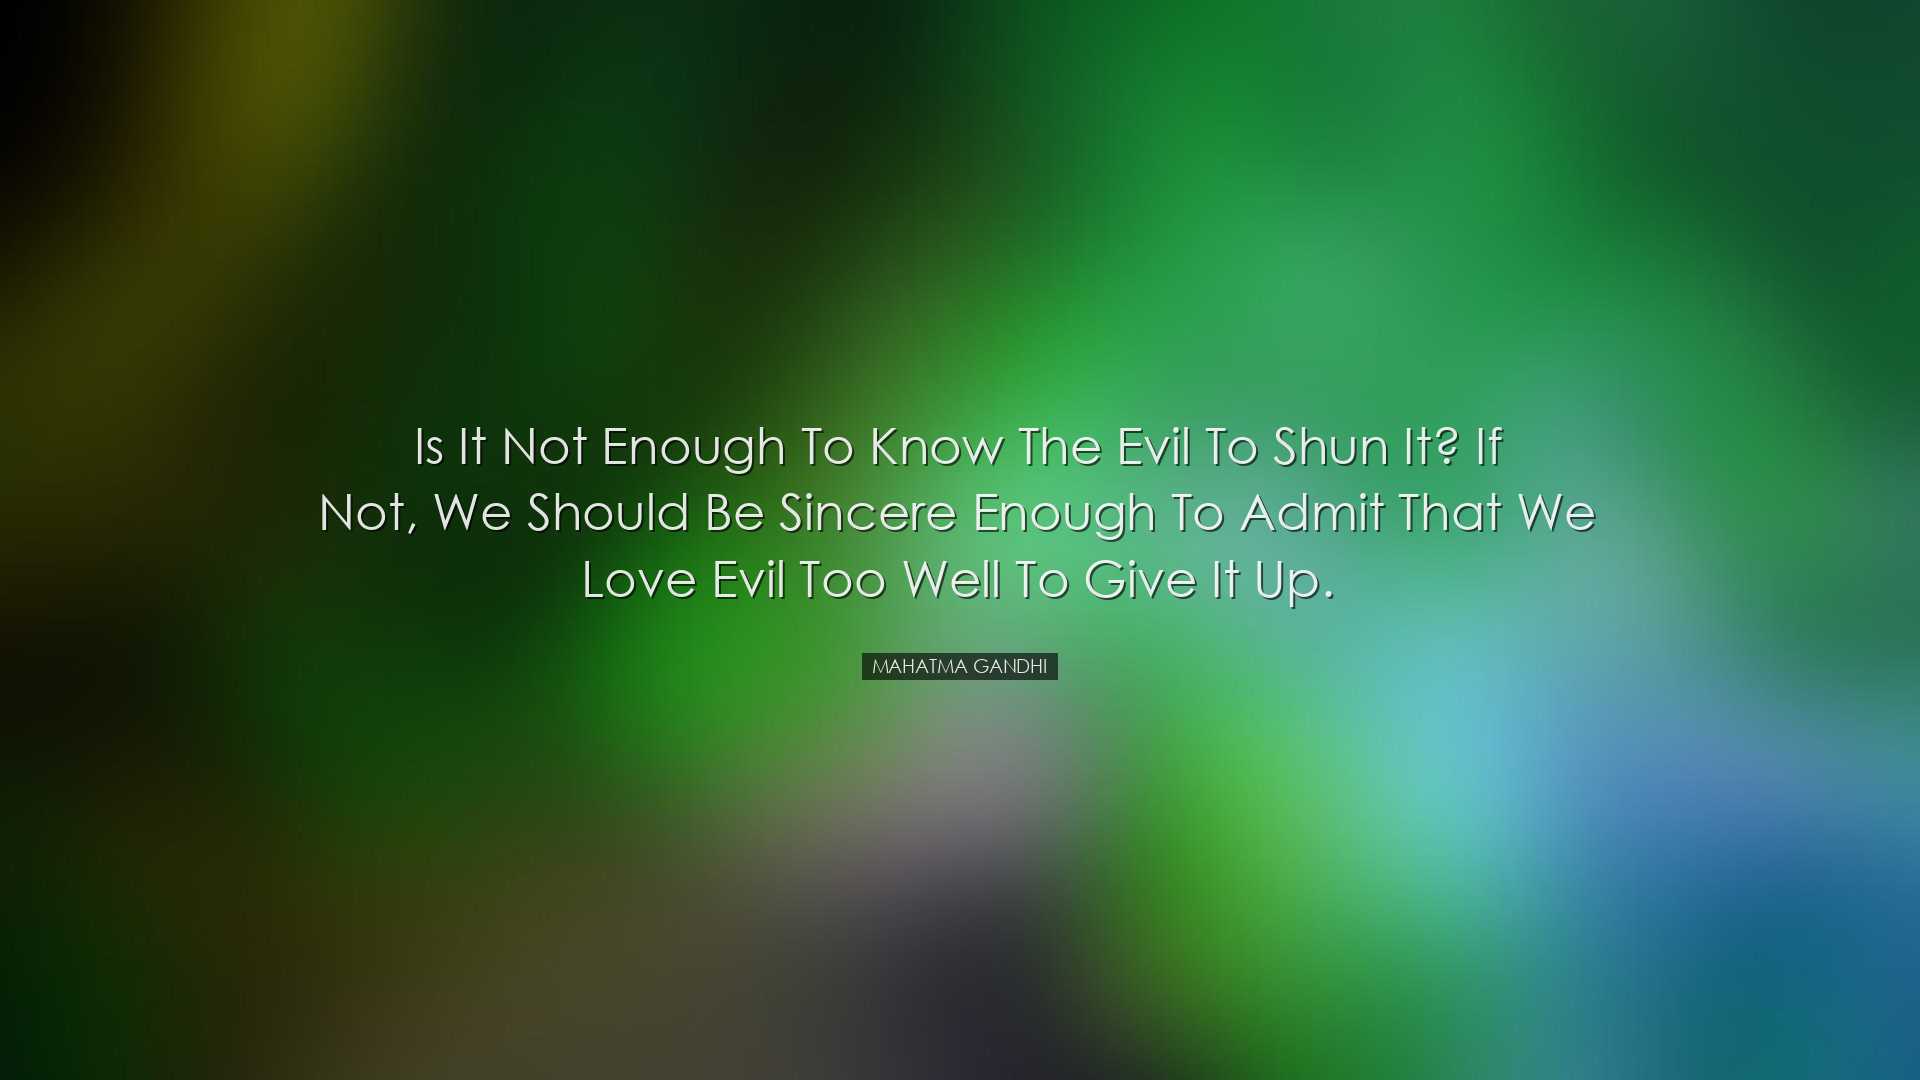 Is it not enough to know the evil to shun it? If not, we should be